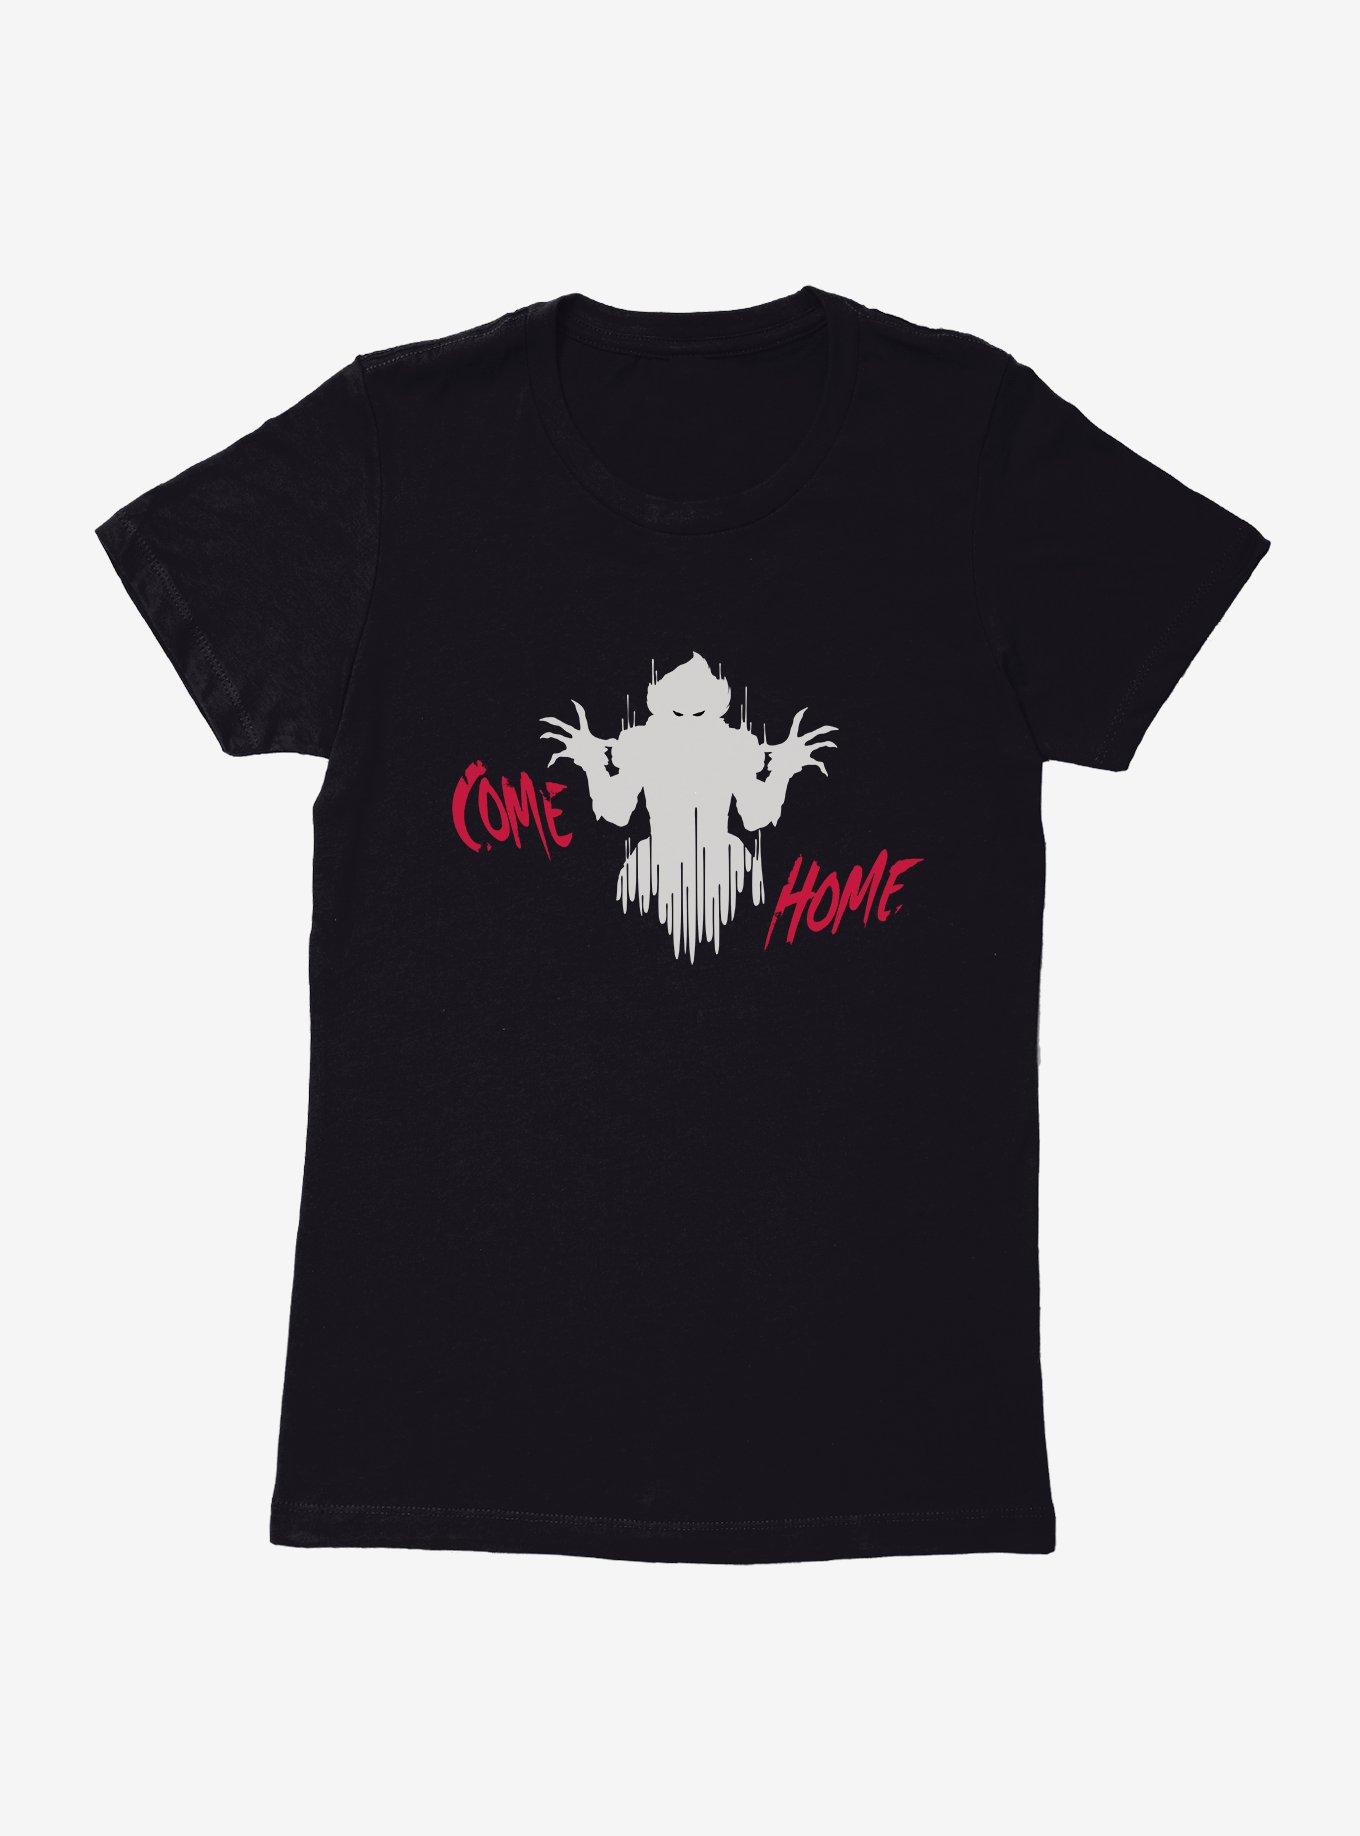 IT Chapter Two Pennywise Shadow Come Home Red Script Womens T-Shirt, BLACK, hi-res